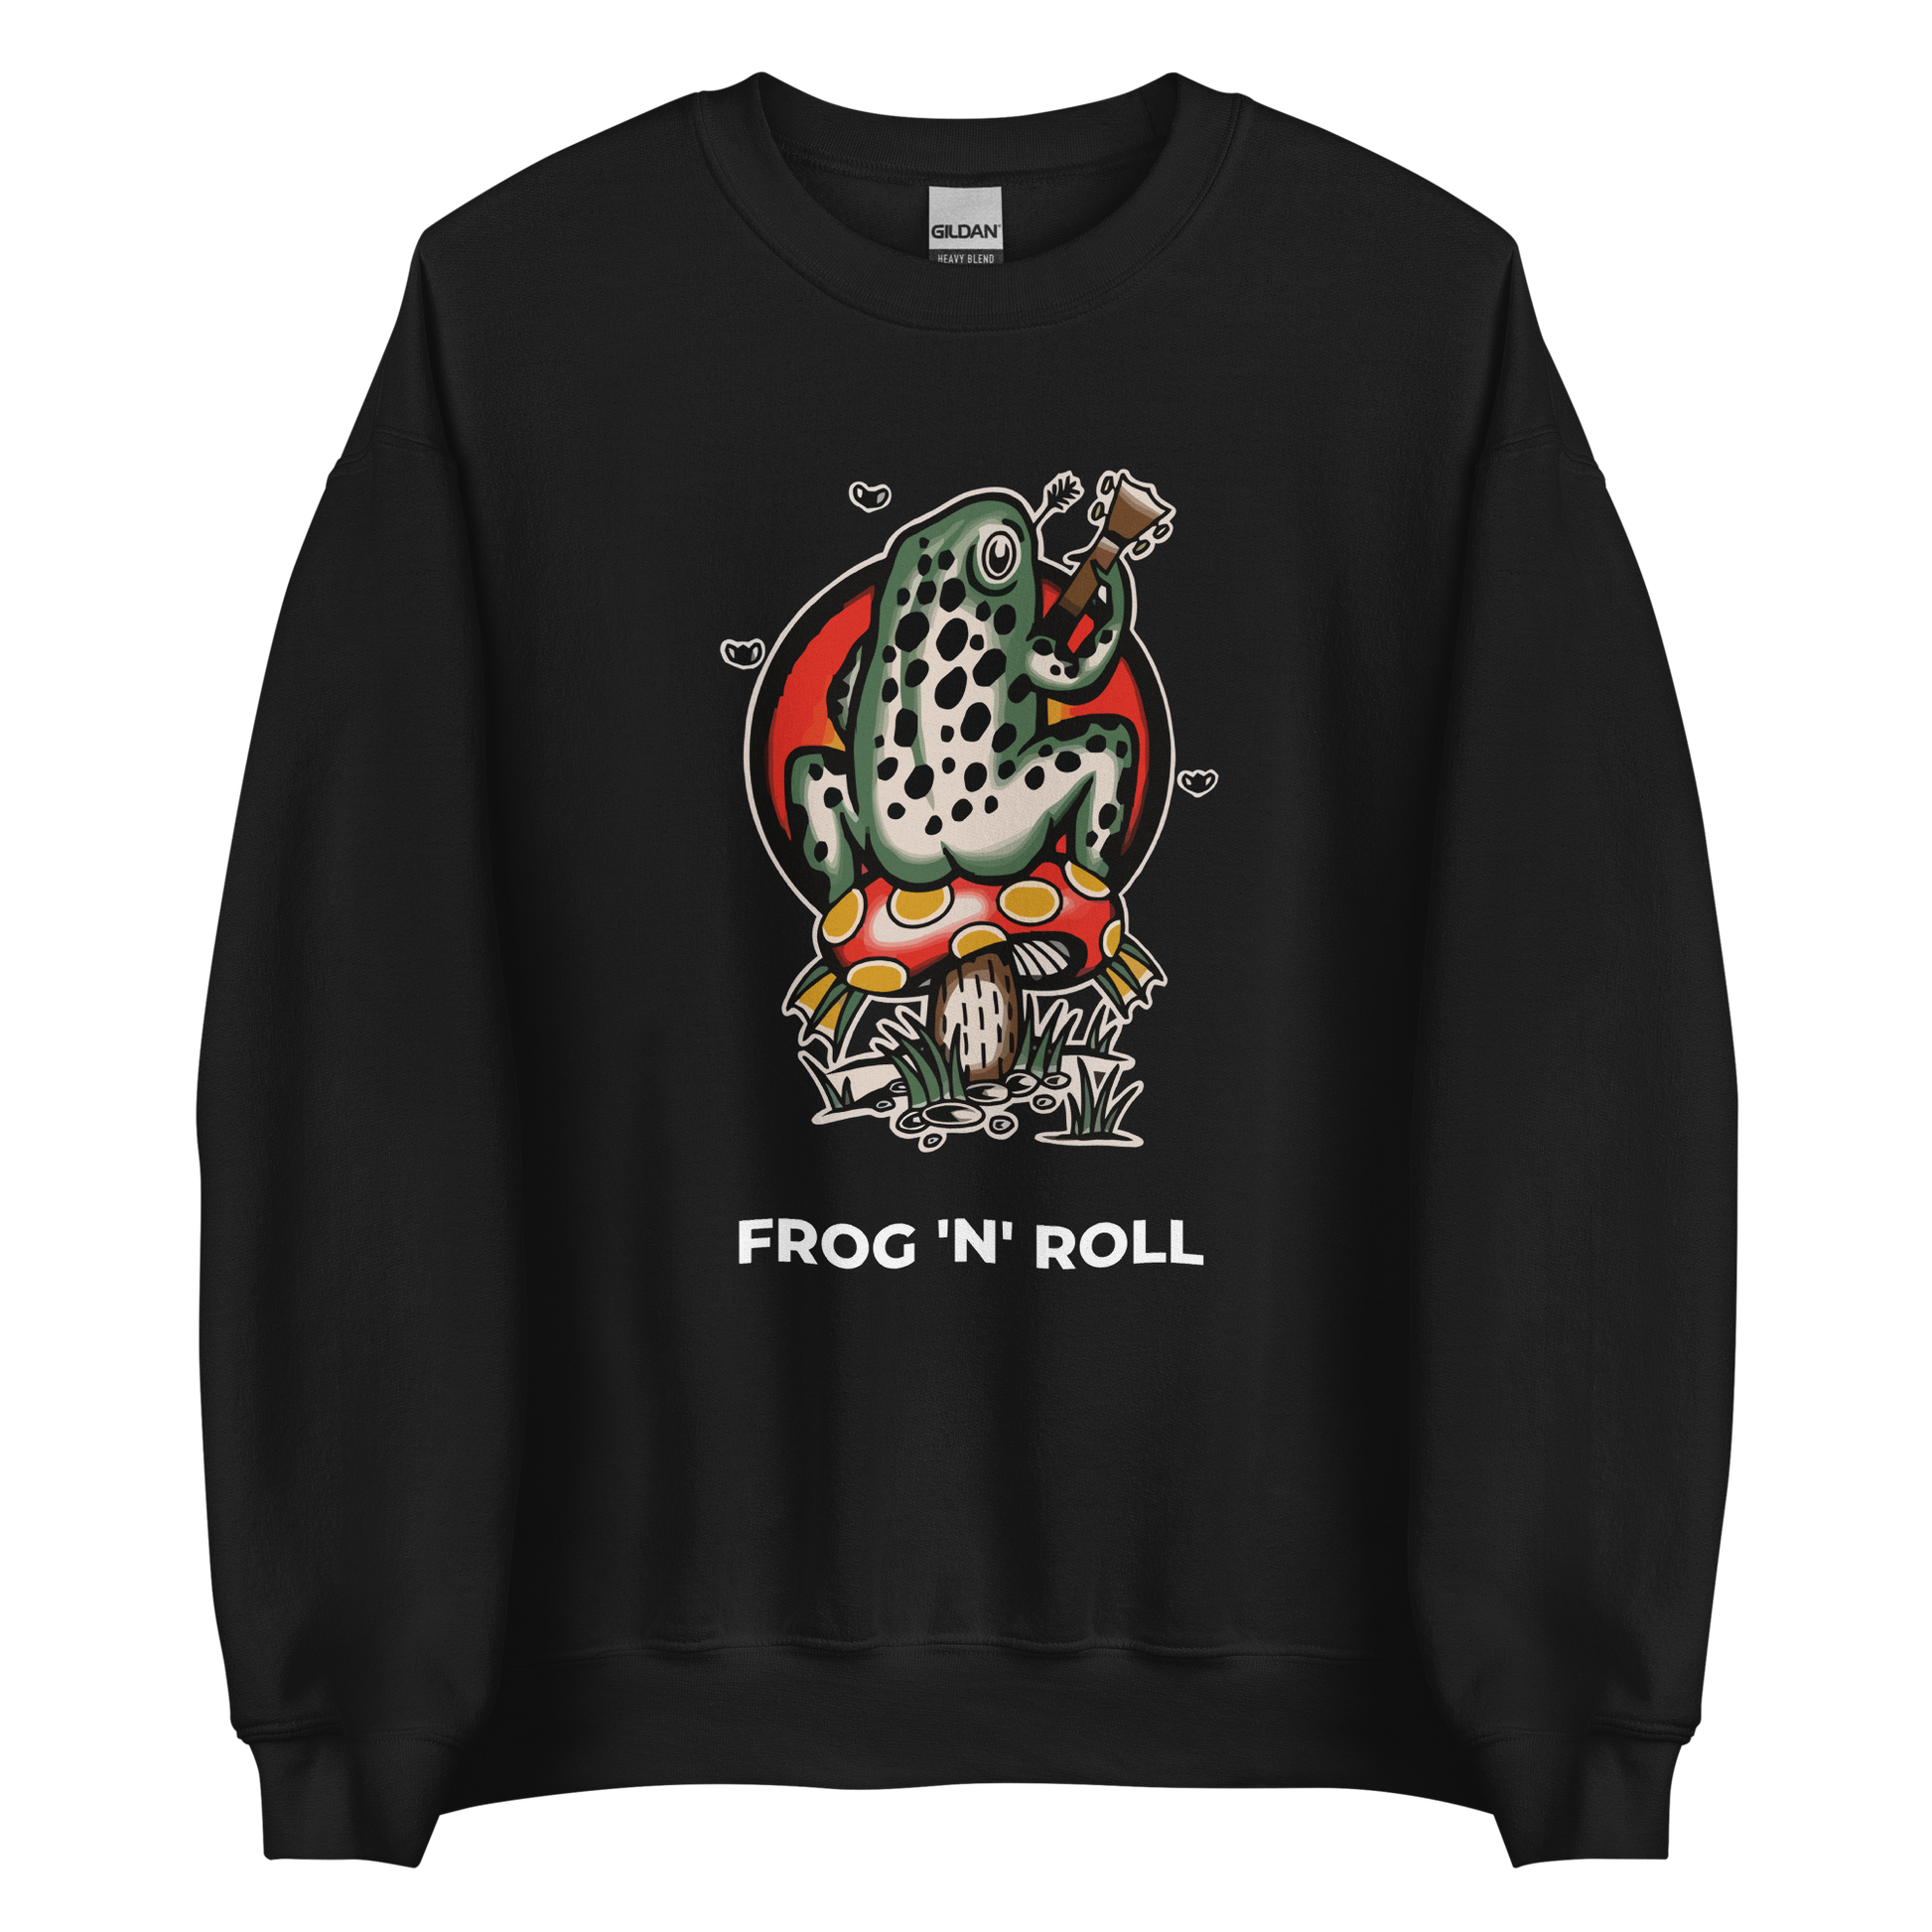 Black Frog Sweatshirt featuring the hilarious Frog 'n' Roll graphic on the chest - Funny Graphic Frog Sweatshirts - Boozy Fox